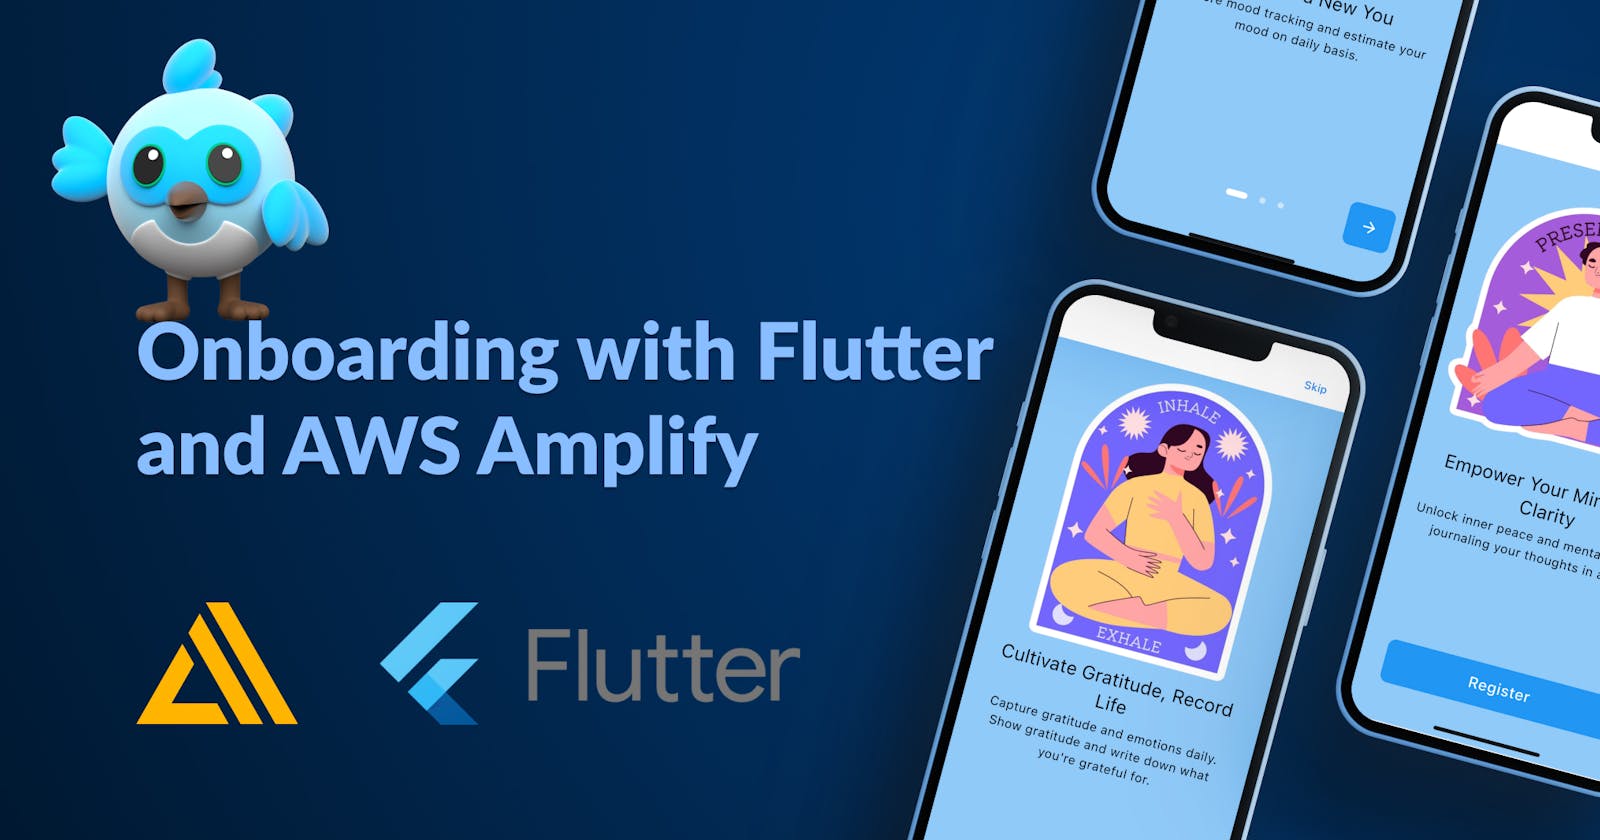 Onboarding with Flutter and AWS Amplify